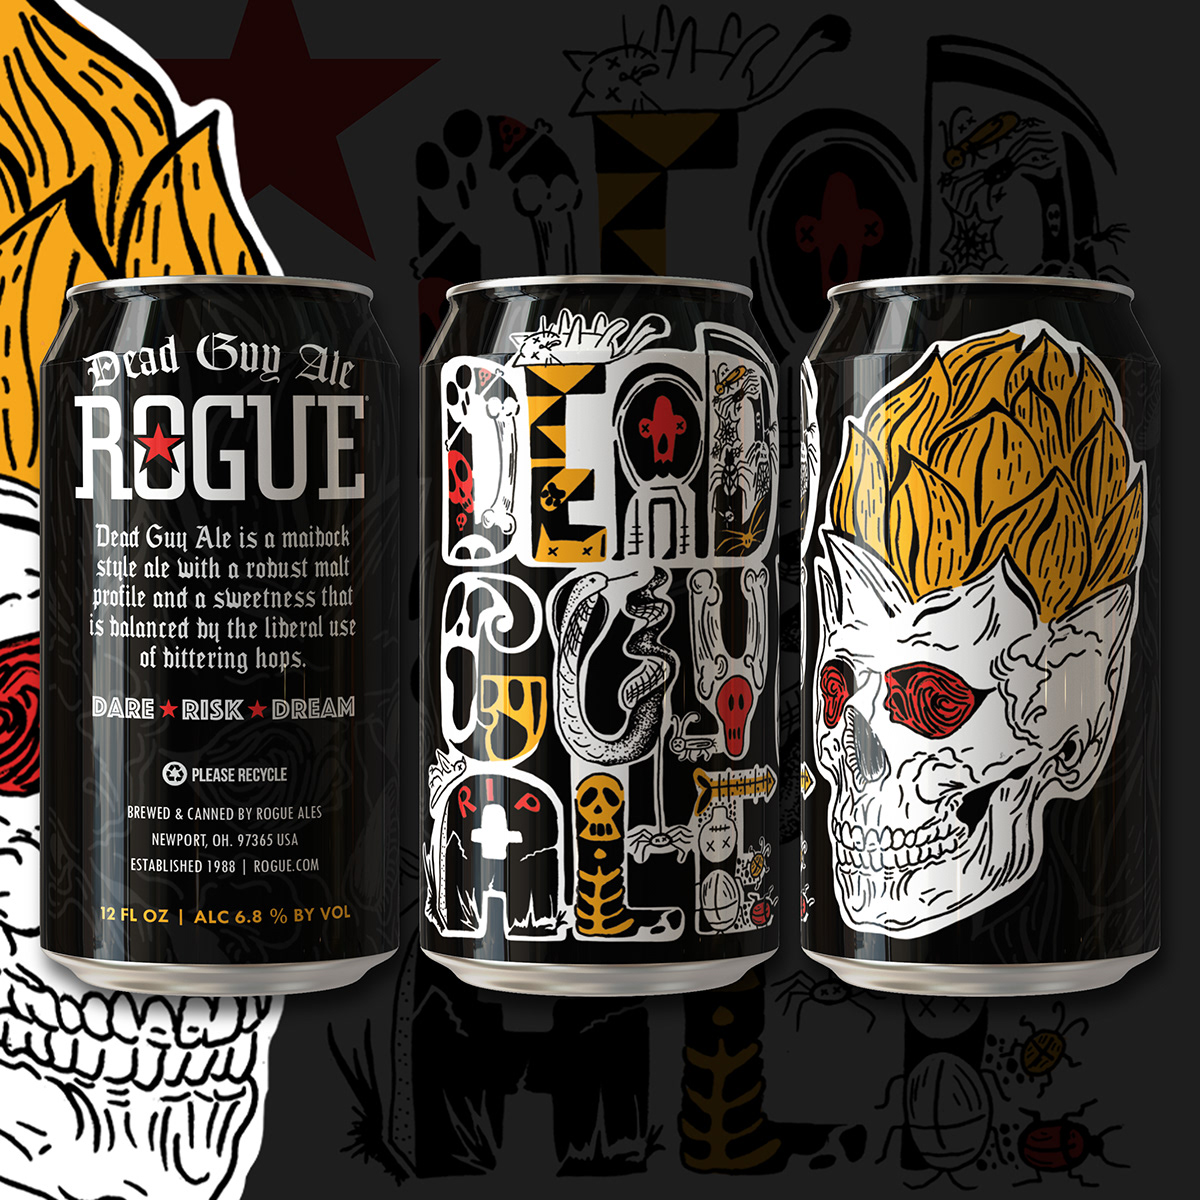 Craft beer label design with skull for Rogue Dead Guy Ale can contest